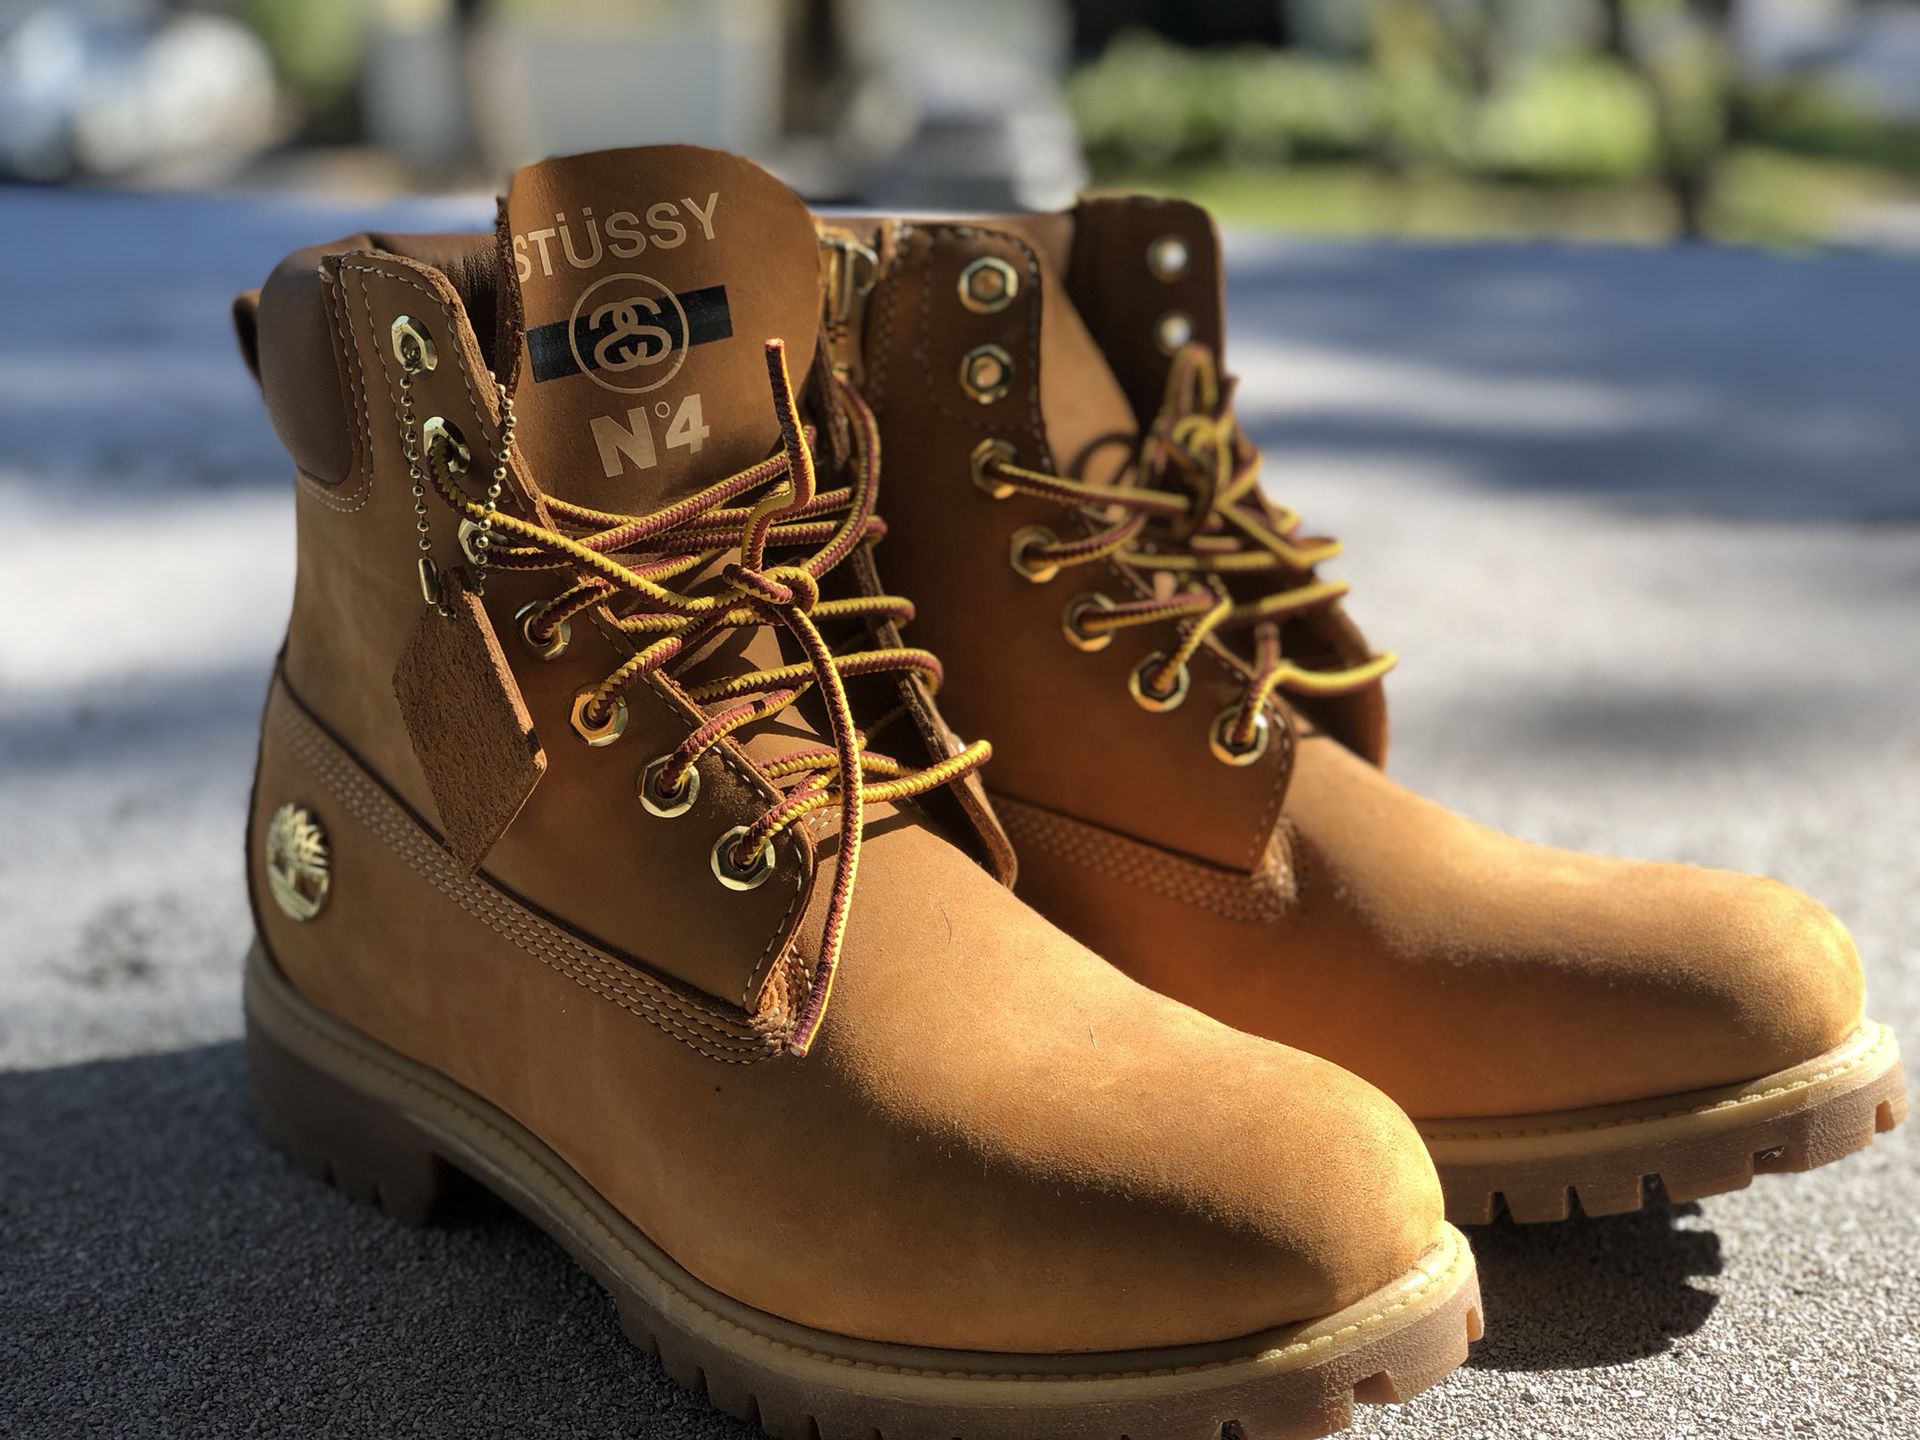 STUSSY / TIMBERLAND BOOTS HOLIDAY (NOVEMBER 2013) for Sale in